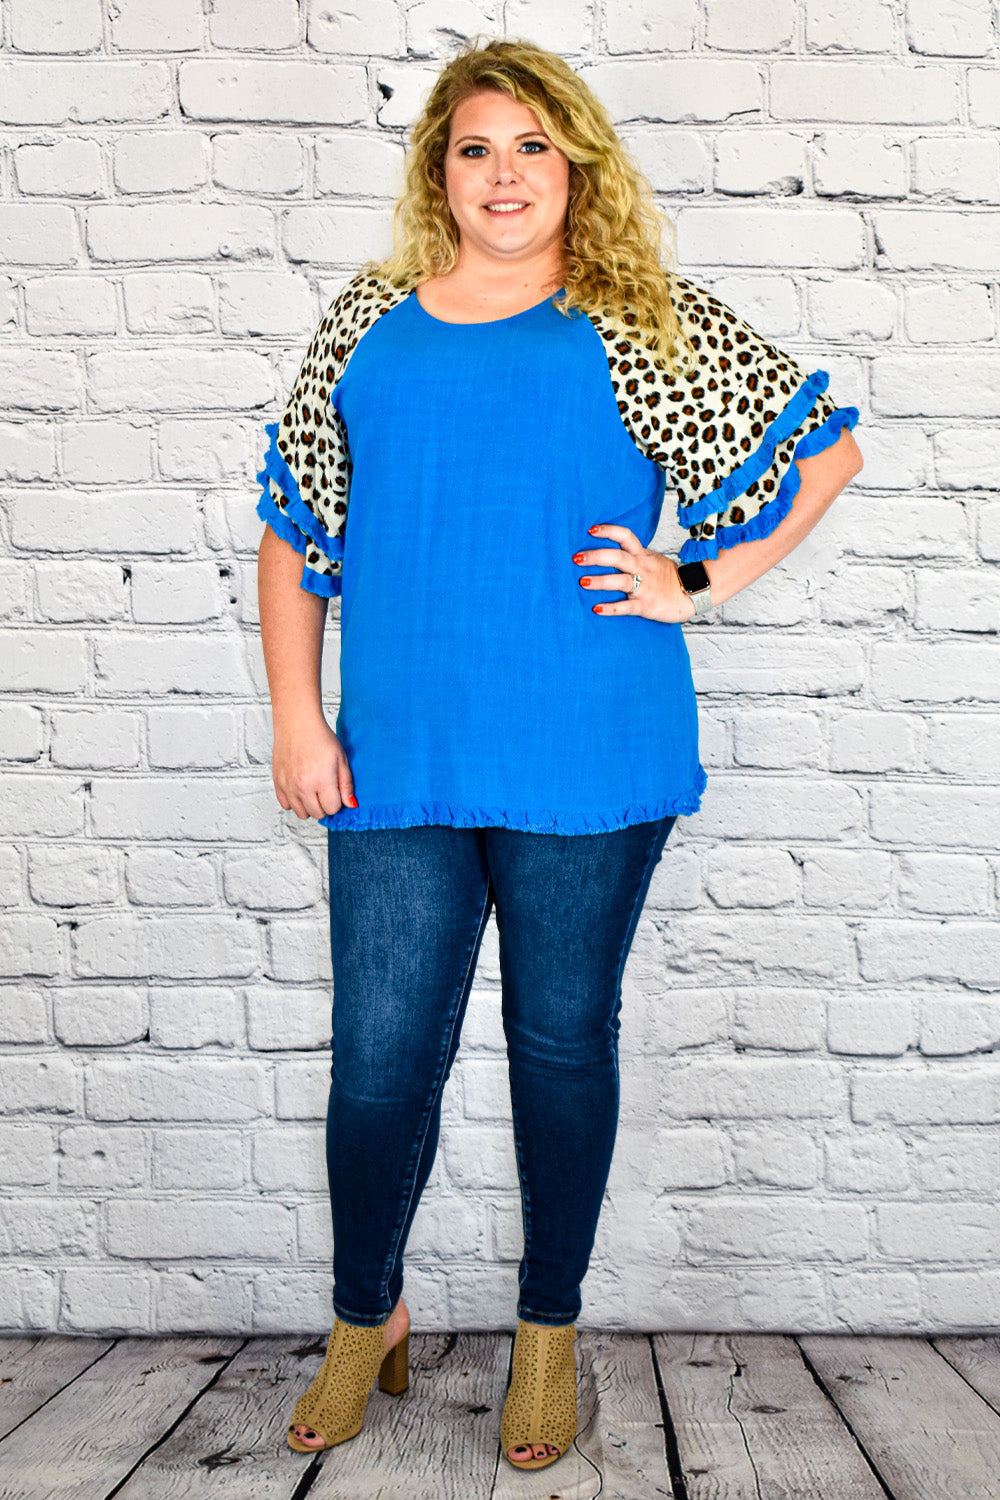 Linen Tunic Top with Animal Print Layered Bell Sleeves in Plus Size by Umgee Clothing